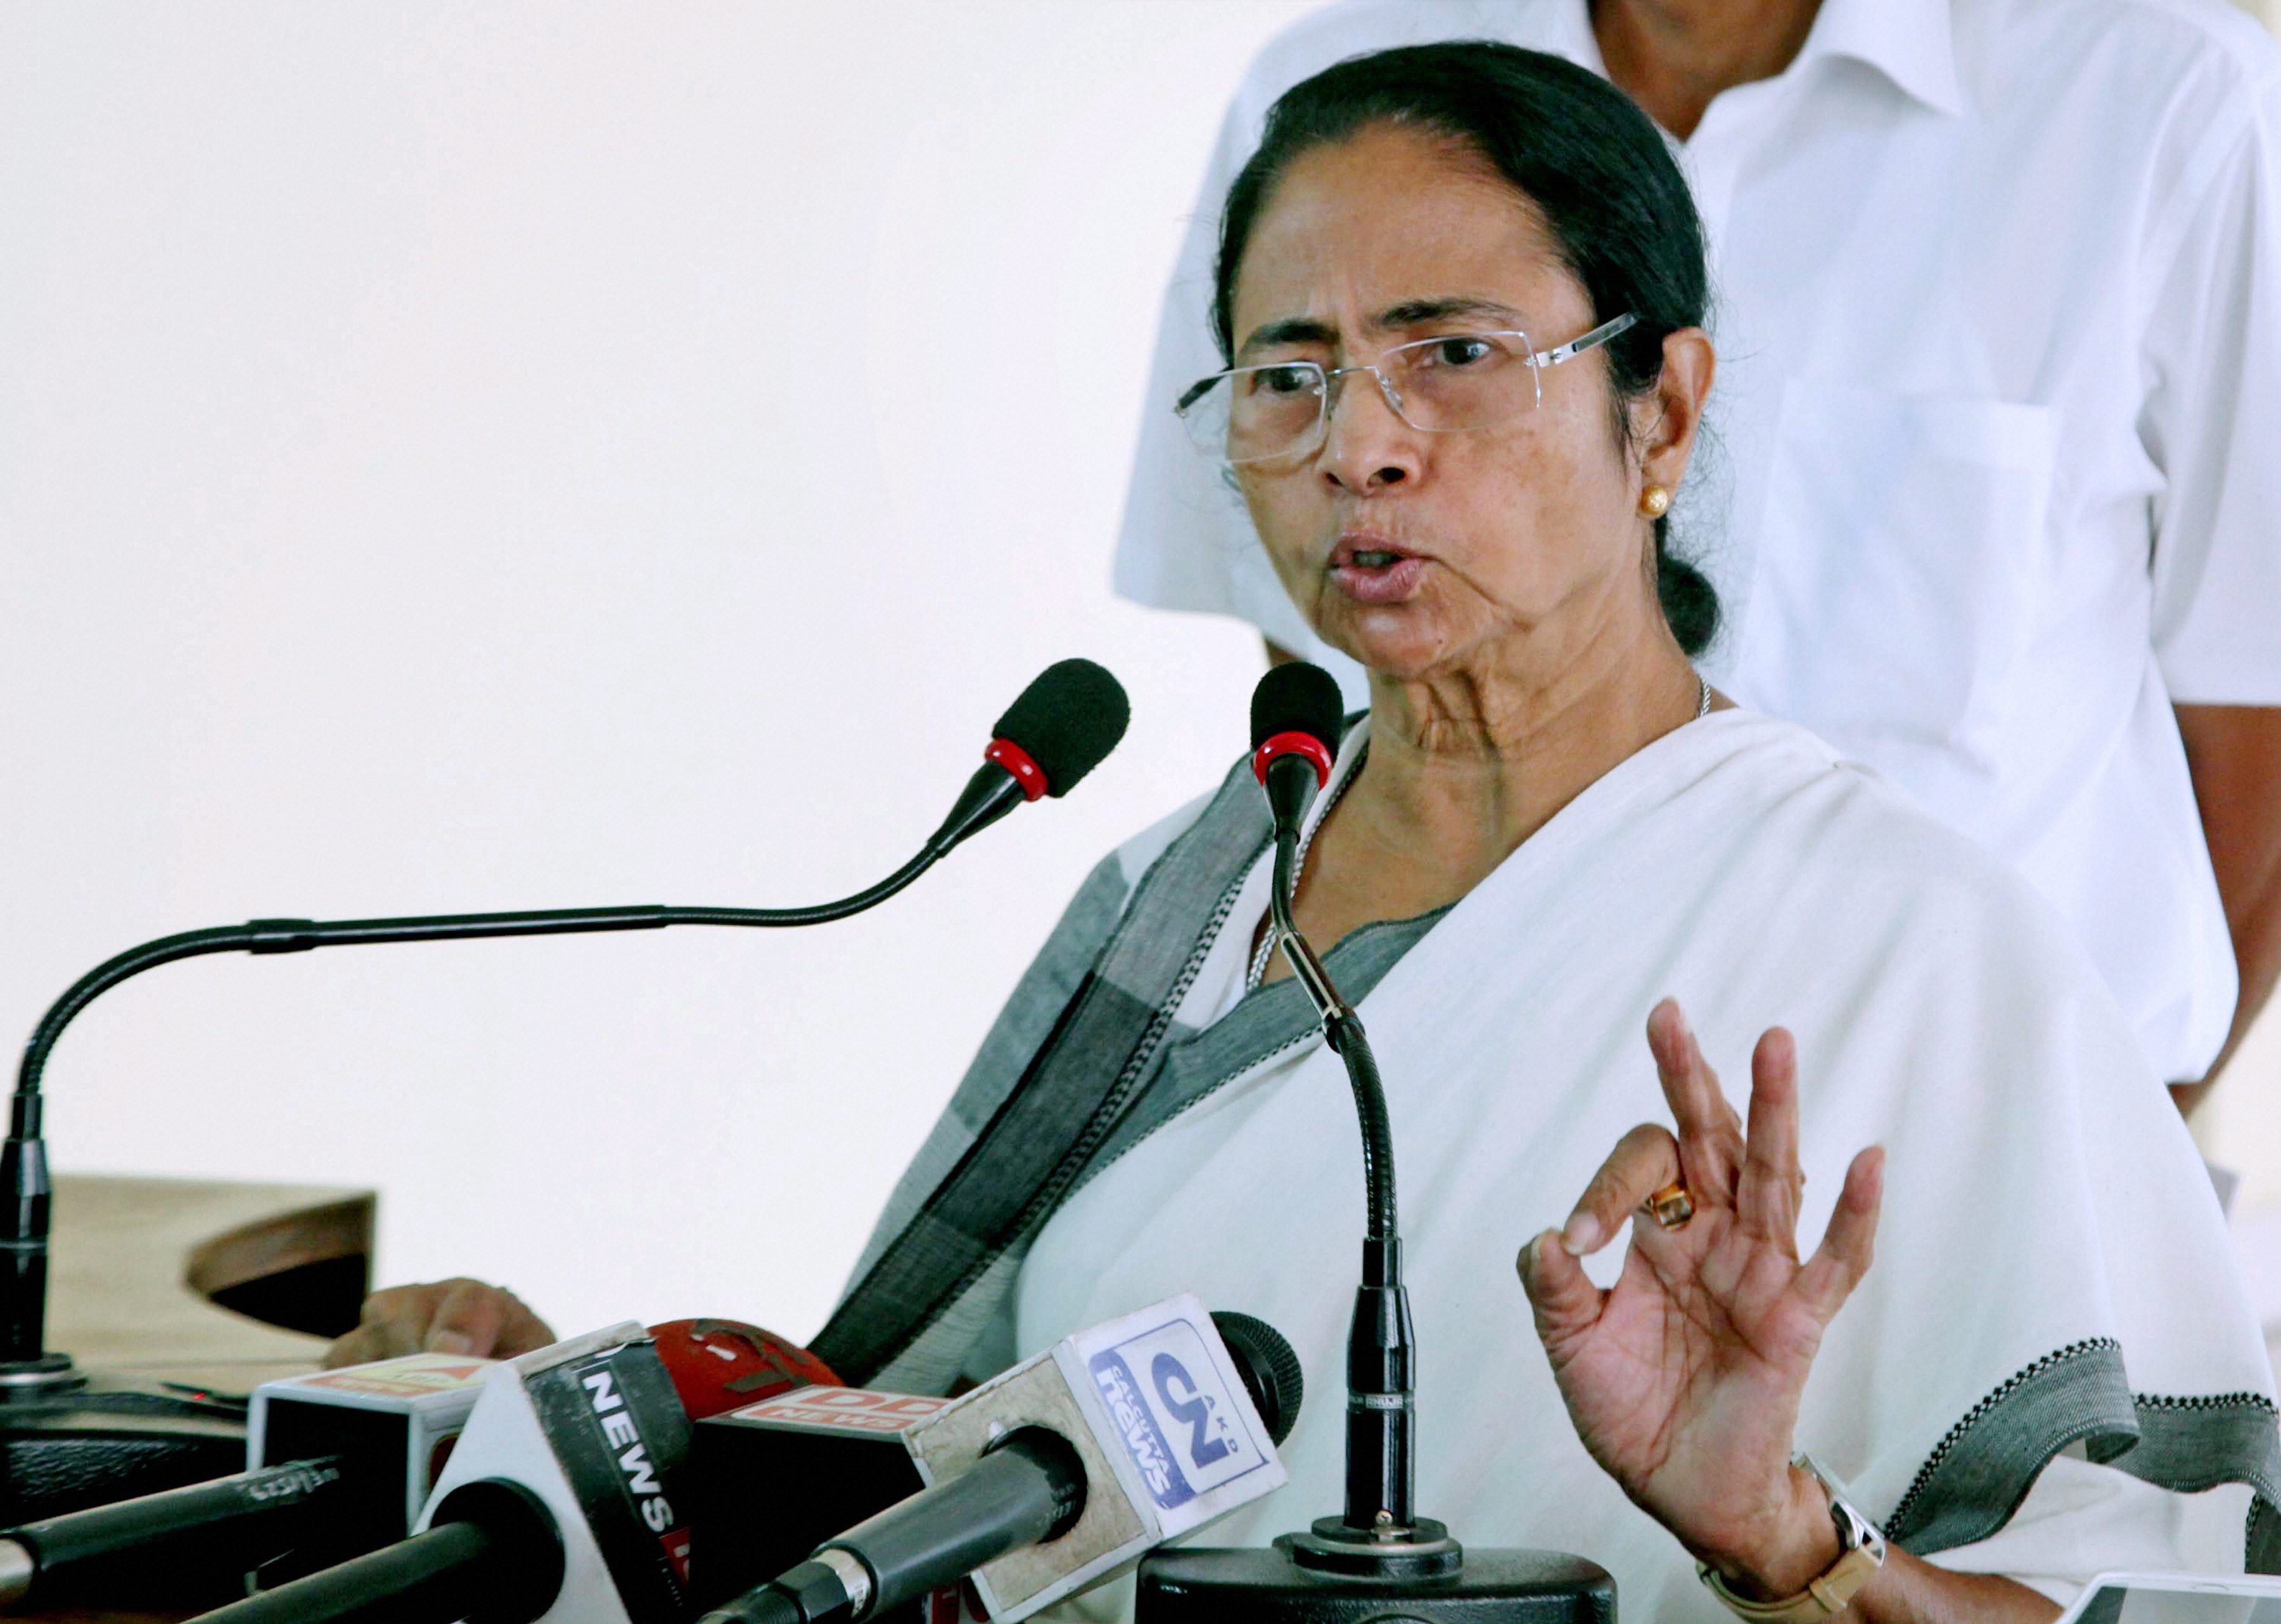 RSS, Bajrang Dal, VHP should not try to disturb peace in eastern Indian state of West Bengal: Mamata